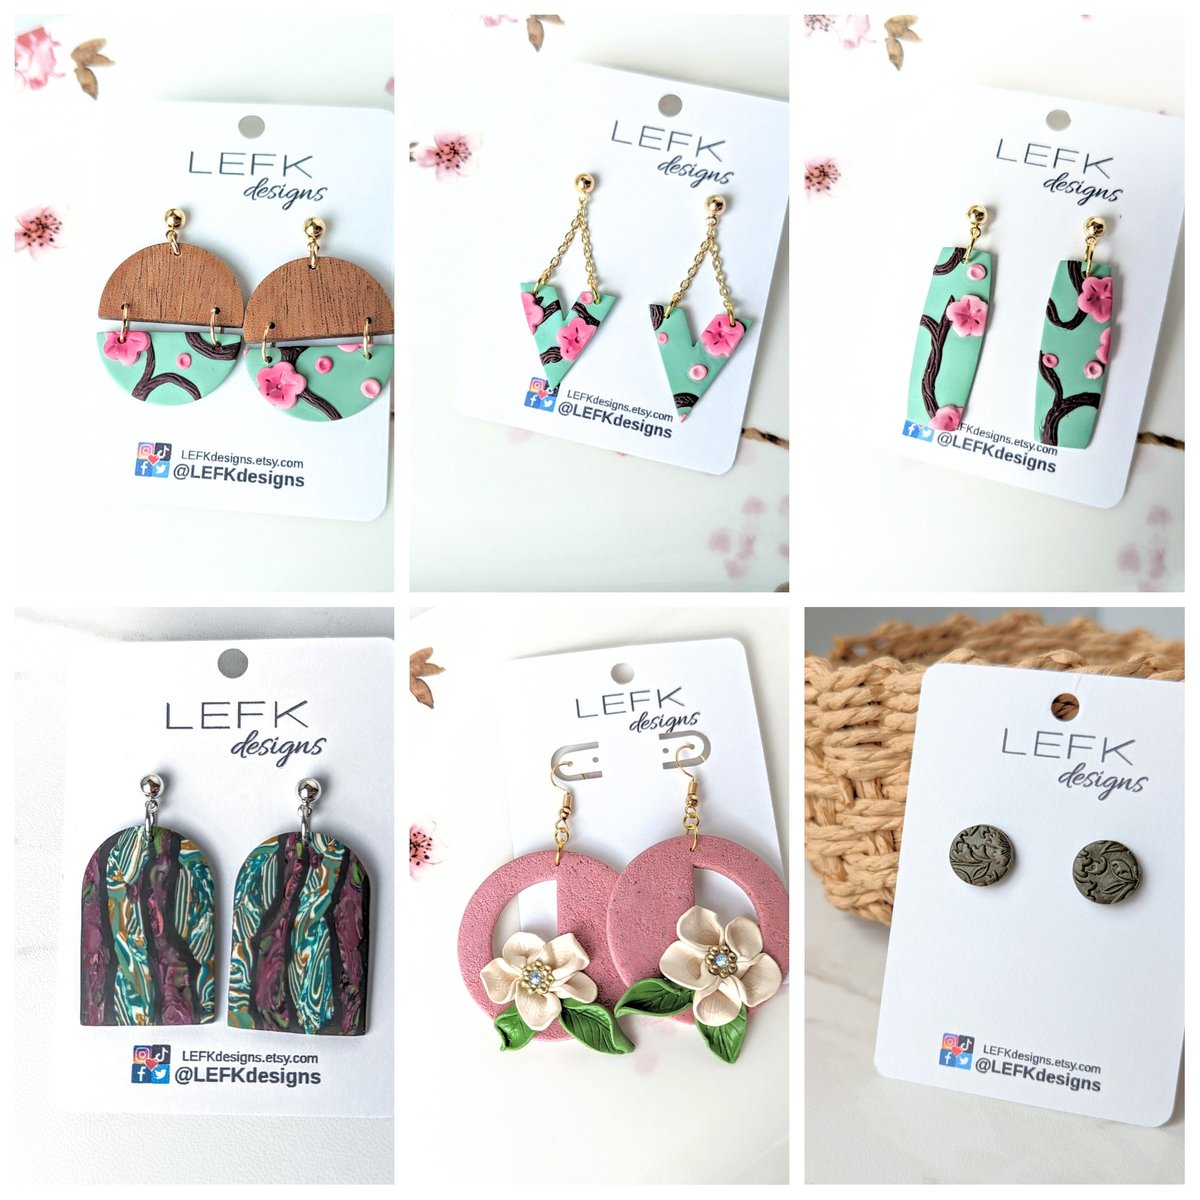 Shop is now live!! Here's what we've got so far with more on the way

#floralearrings #statementearrings #artsyearrings #jewelrydesigns #polymerclayearrings #polymerclayartist #handmadejewelry #queerbusiness #disabledbusinessowner #txsmallbusiness #handmadewithlove